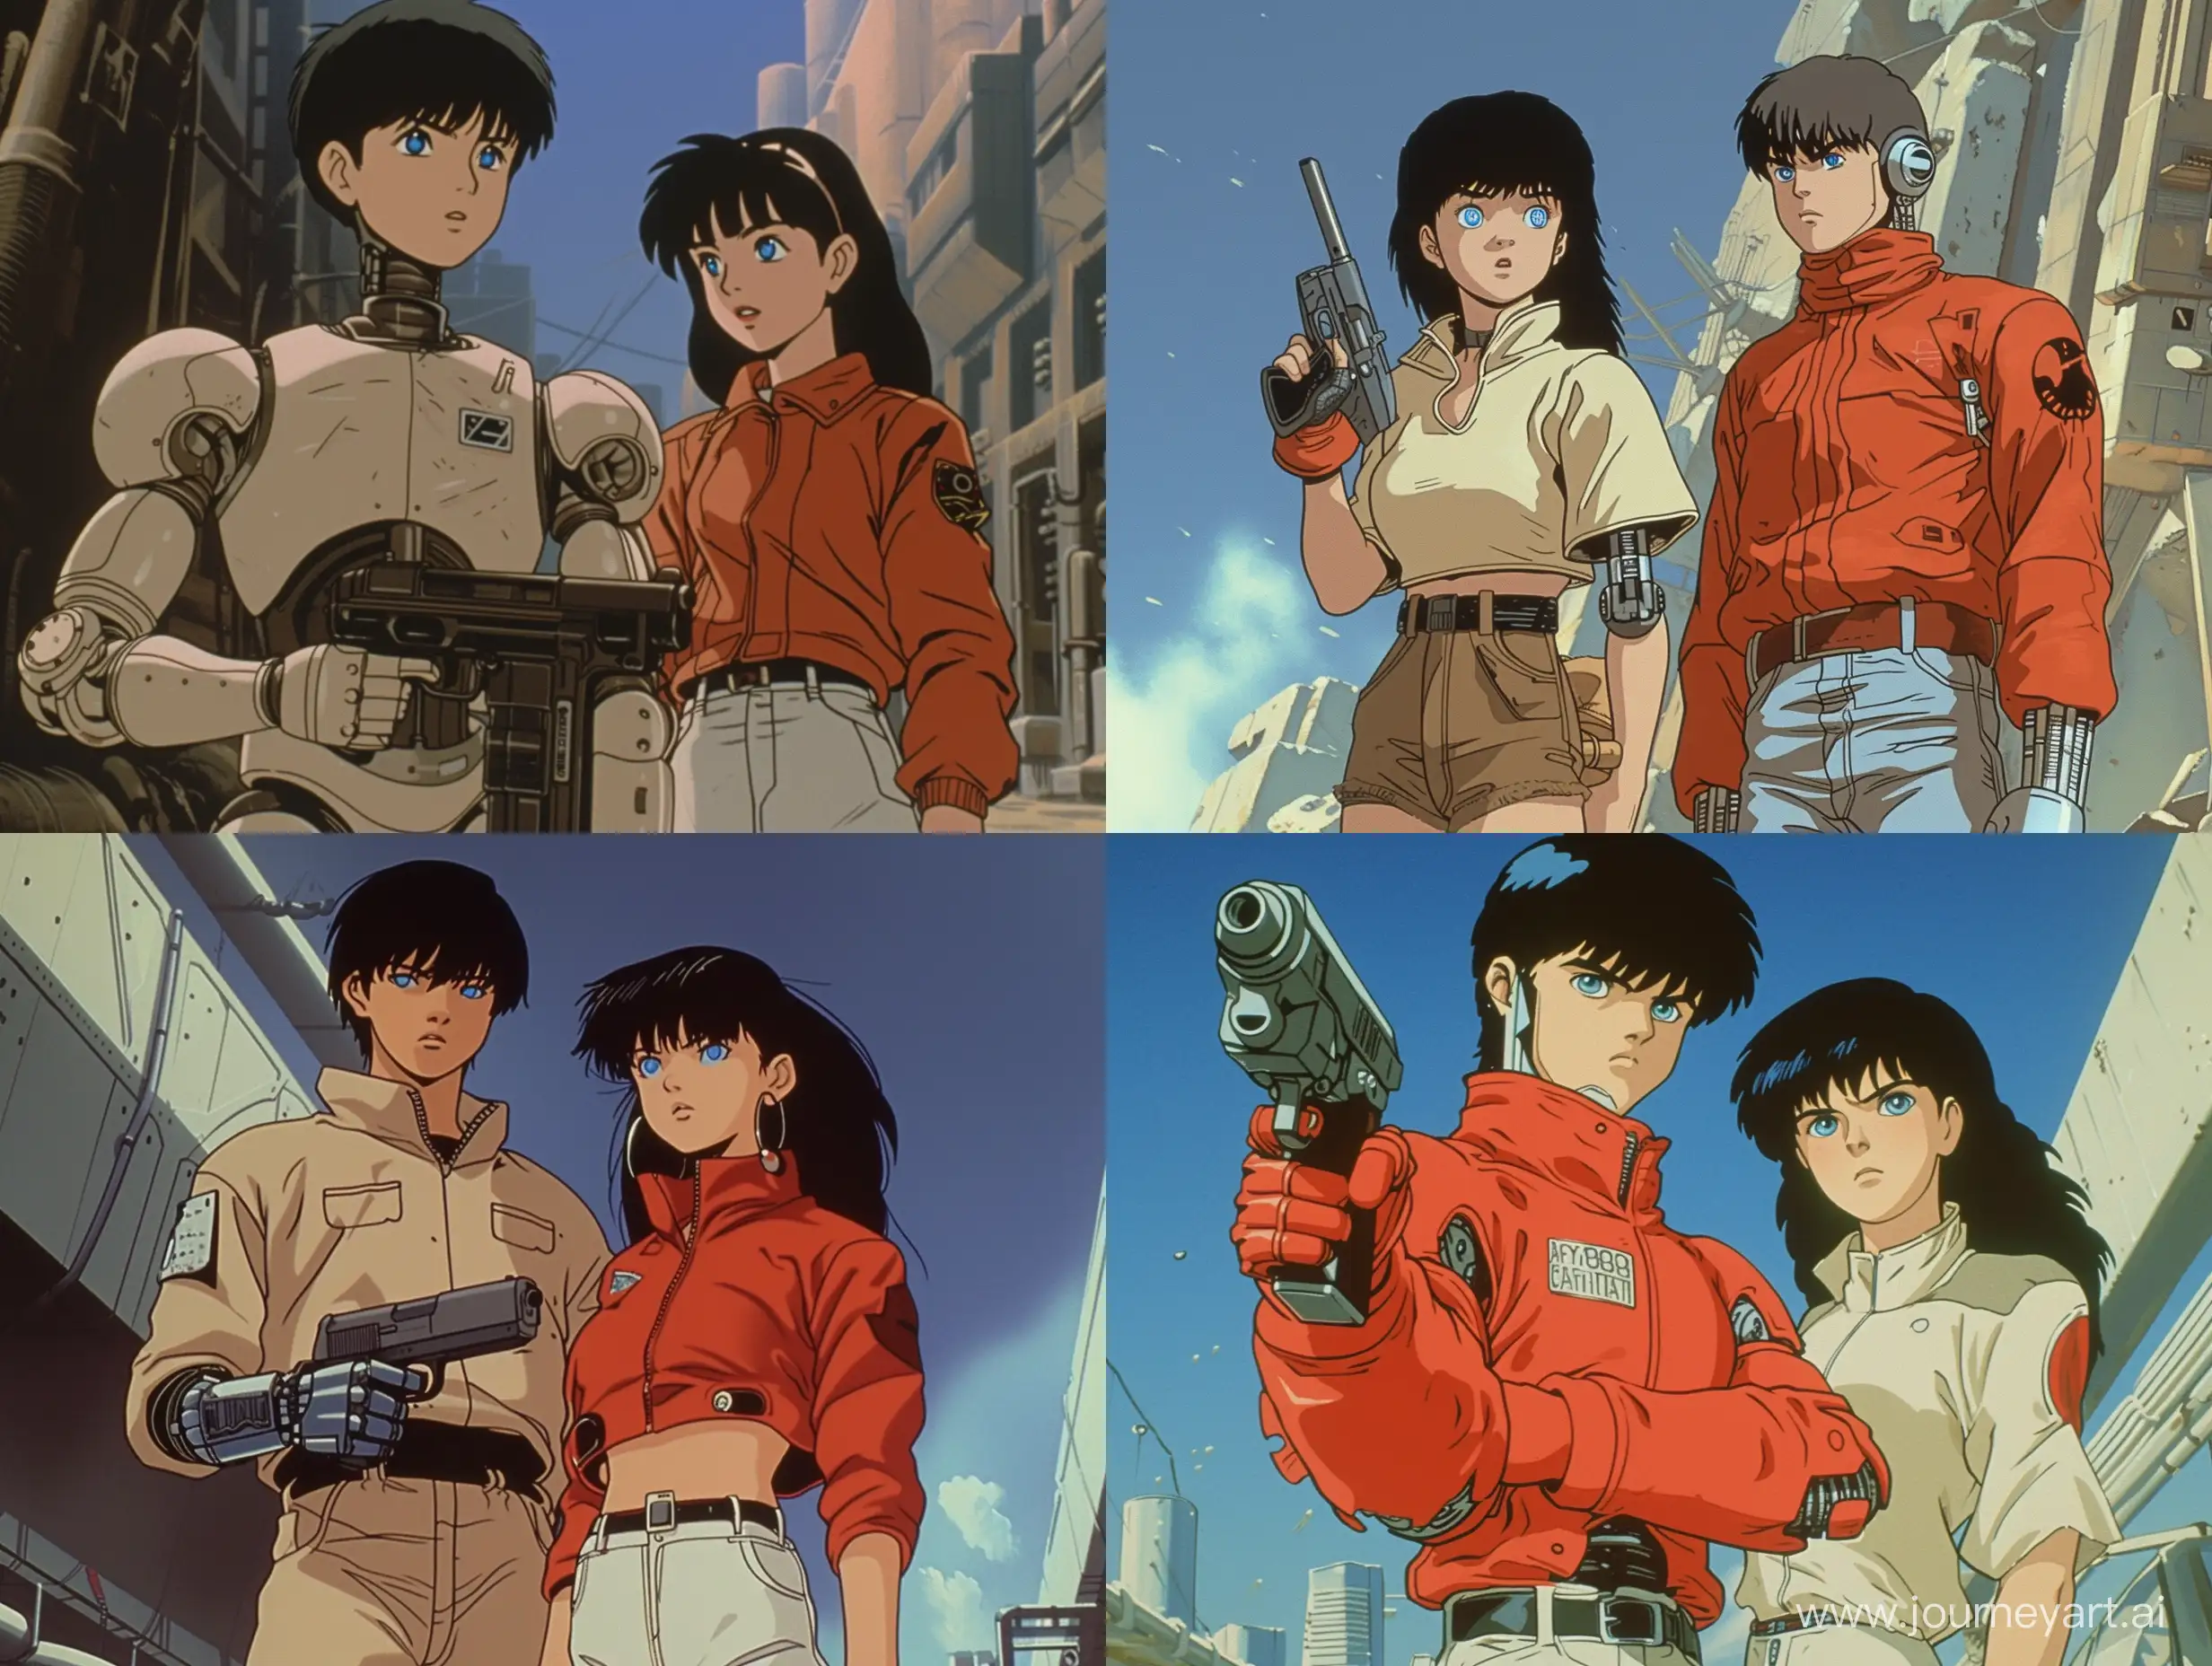 a old 90s cartoon still of a cyborg male standing next to his female partner, nostalgia, anime, akira 1988 still, they have blue eyes, standing in a open area, full body, outside city environment, dystopian, holding a pistol, 